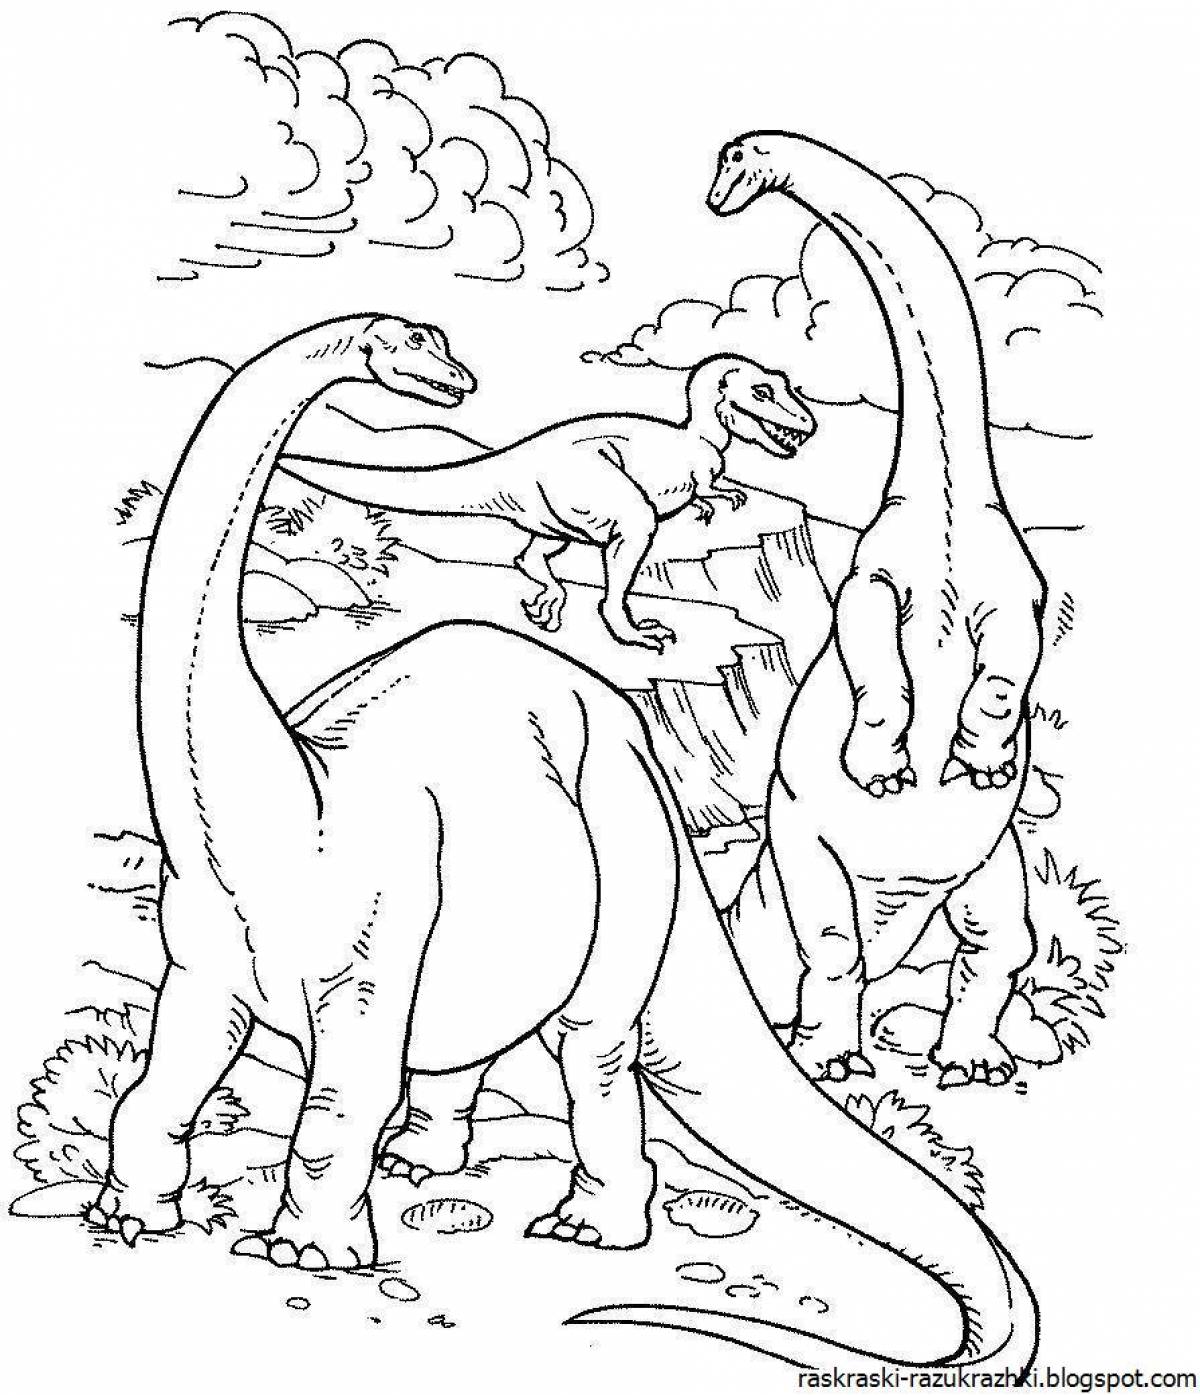 Wonderful dinosaur coloring book for 4-5 year olds